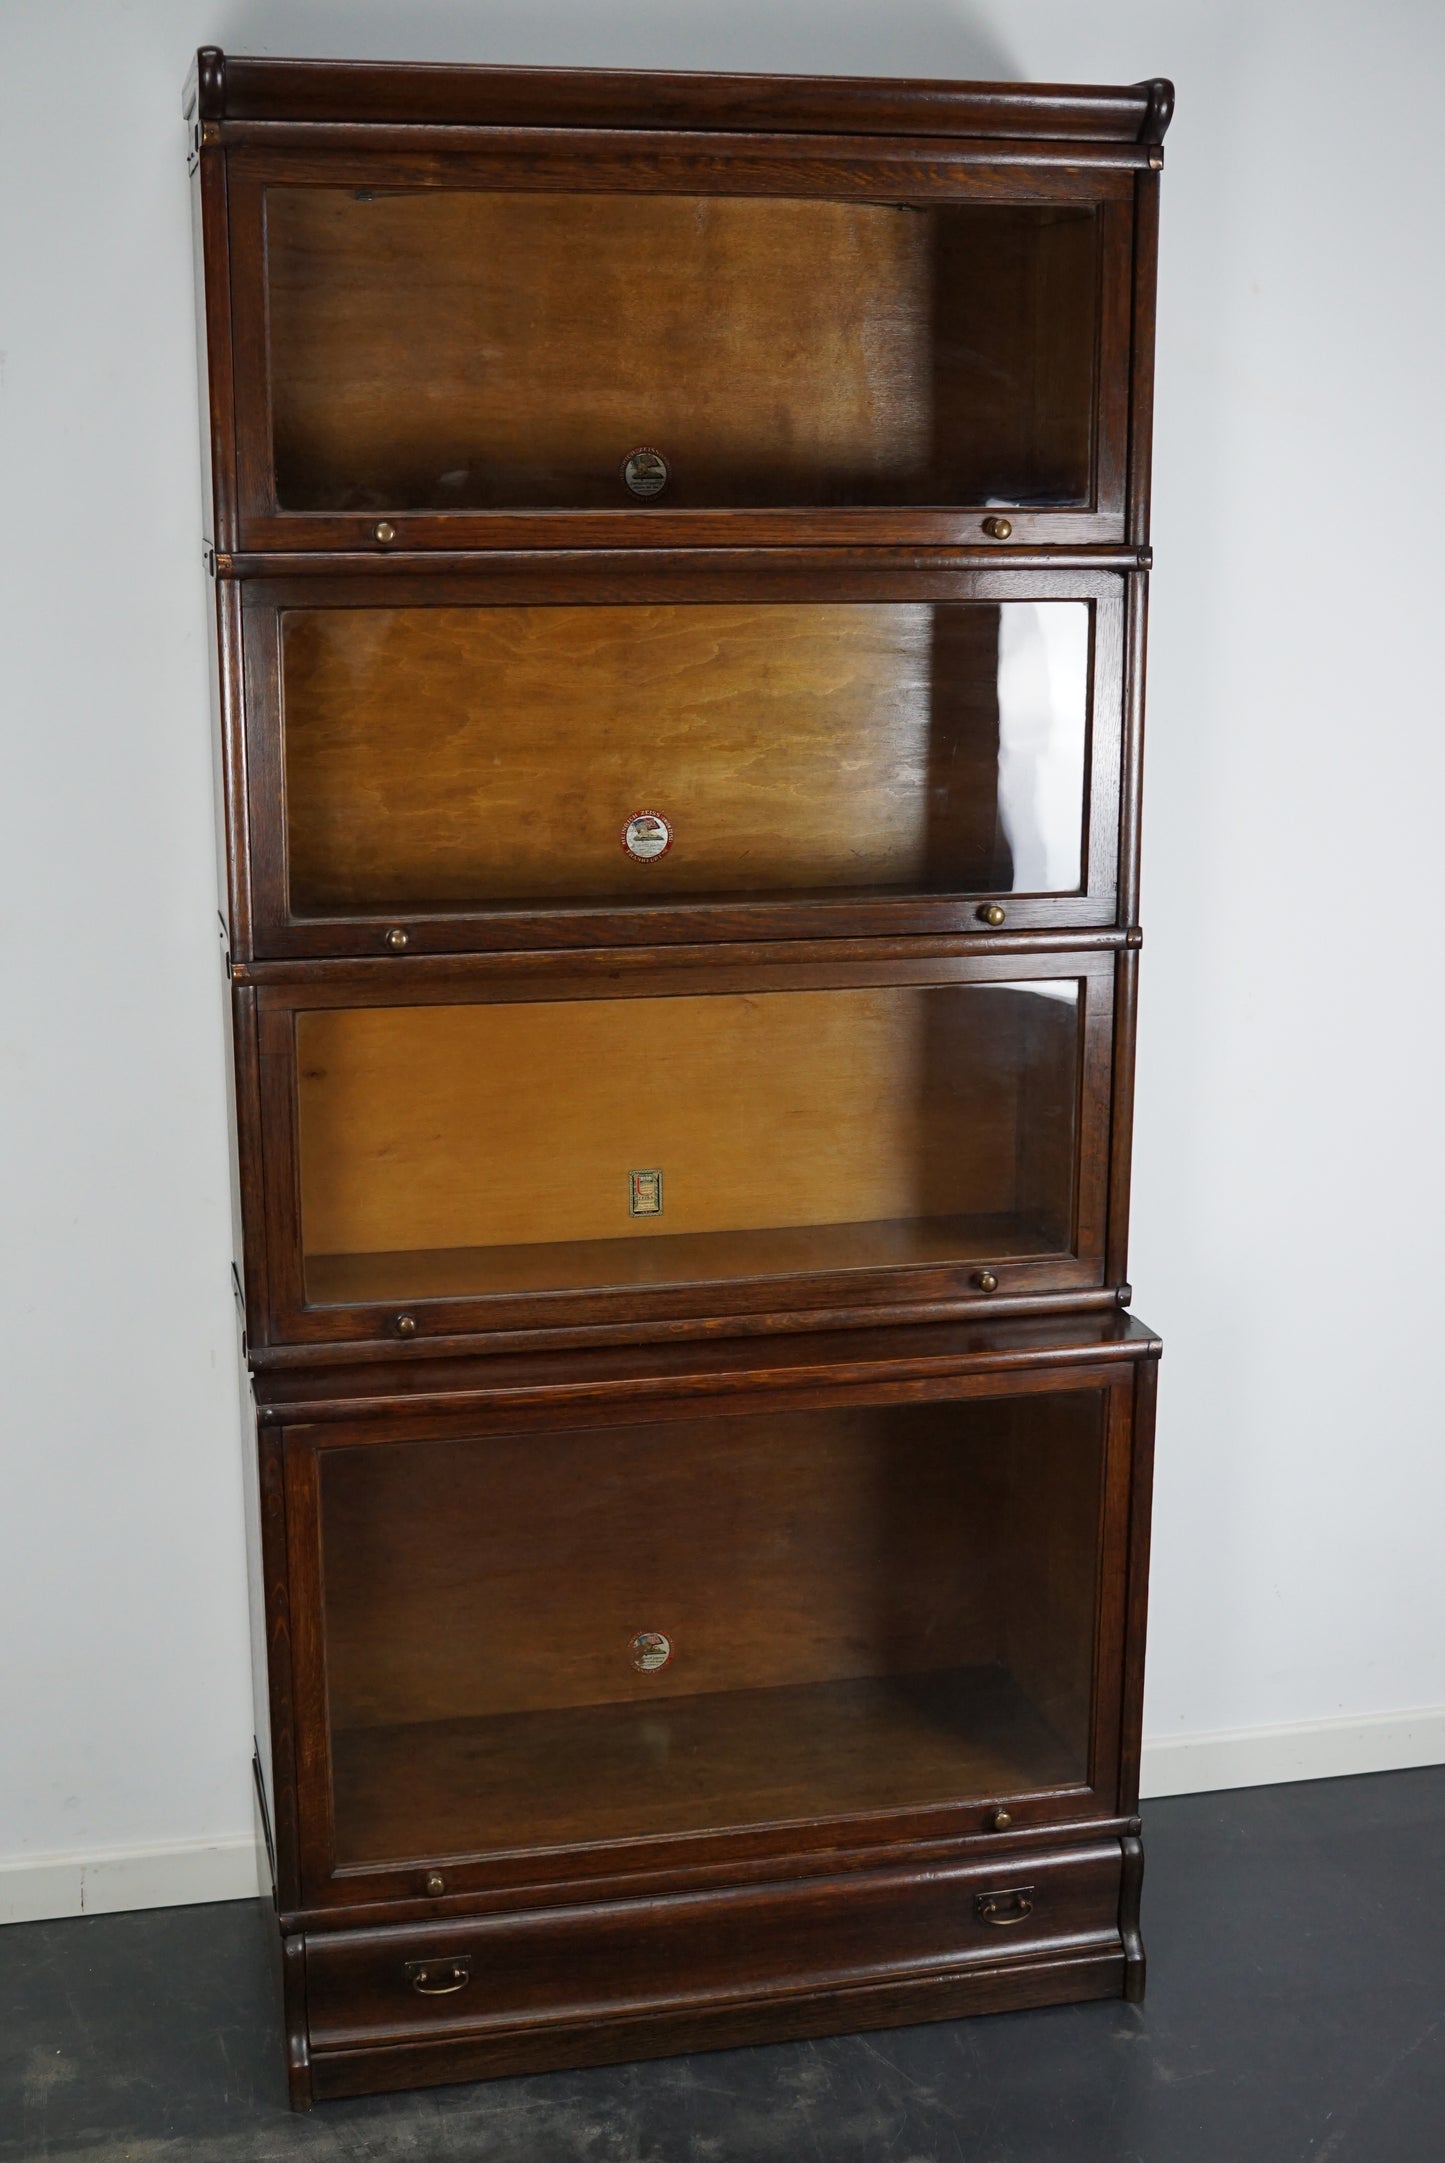 Antique Oak Stacking Bookcase by Union Zeiss / Globe Wernicke, ca 1900